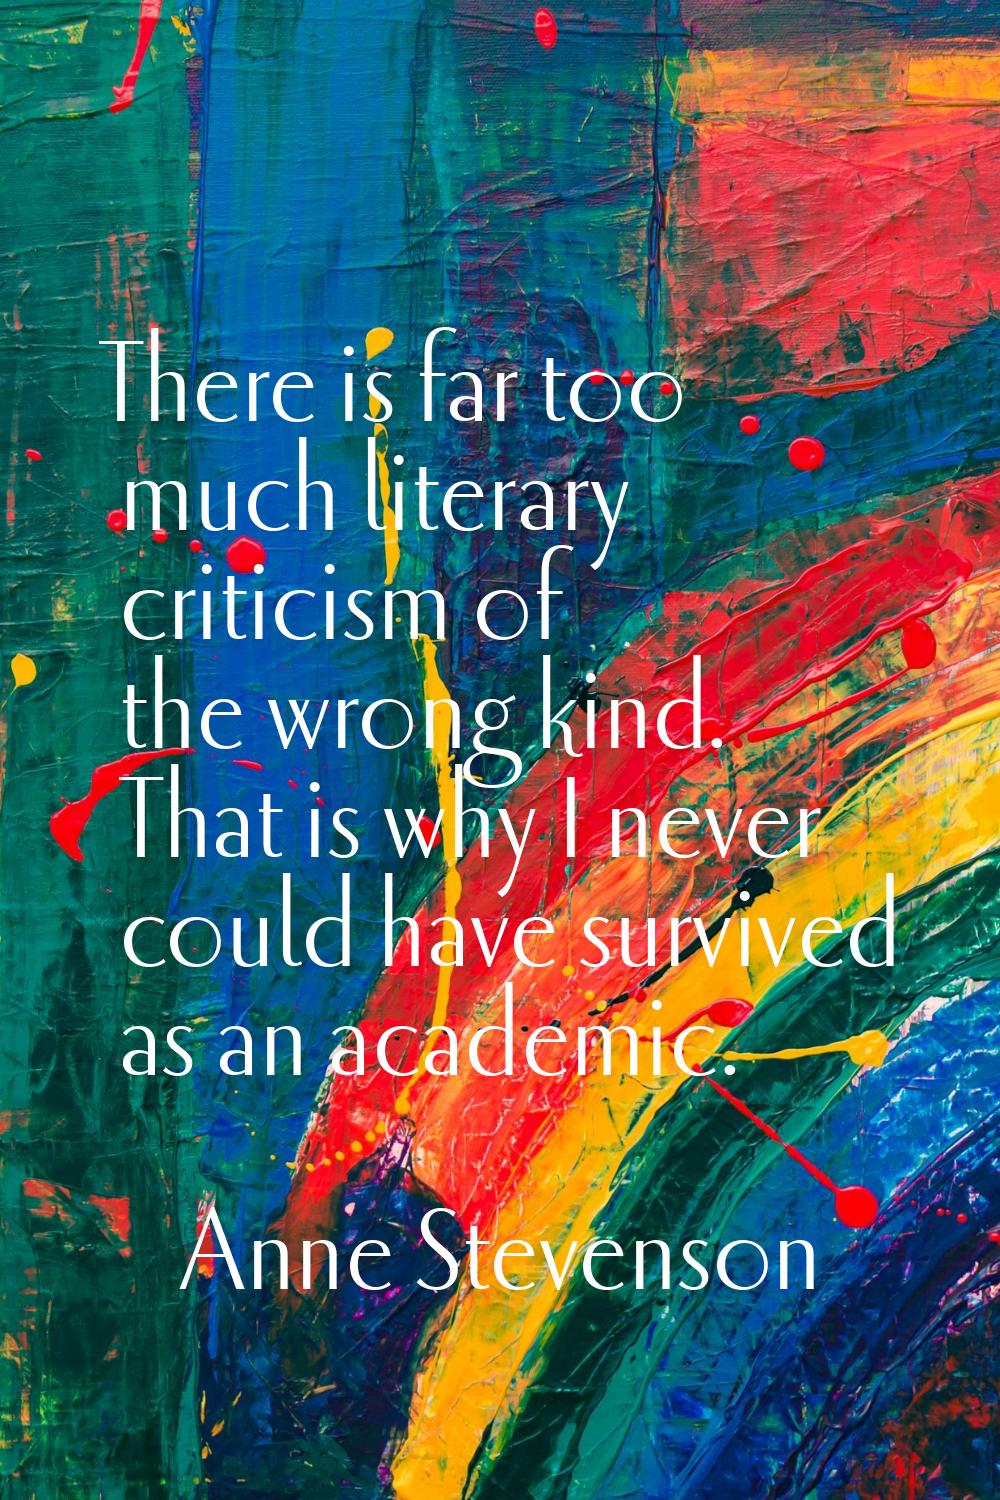 There is far too much literary criticism of the wrong kind. That is why I never could have survived